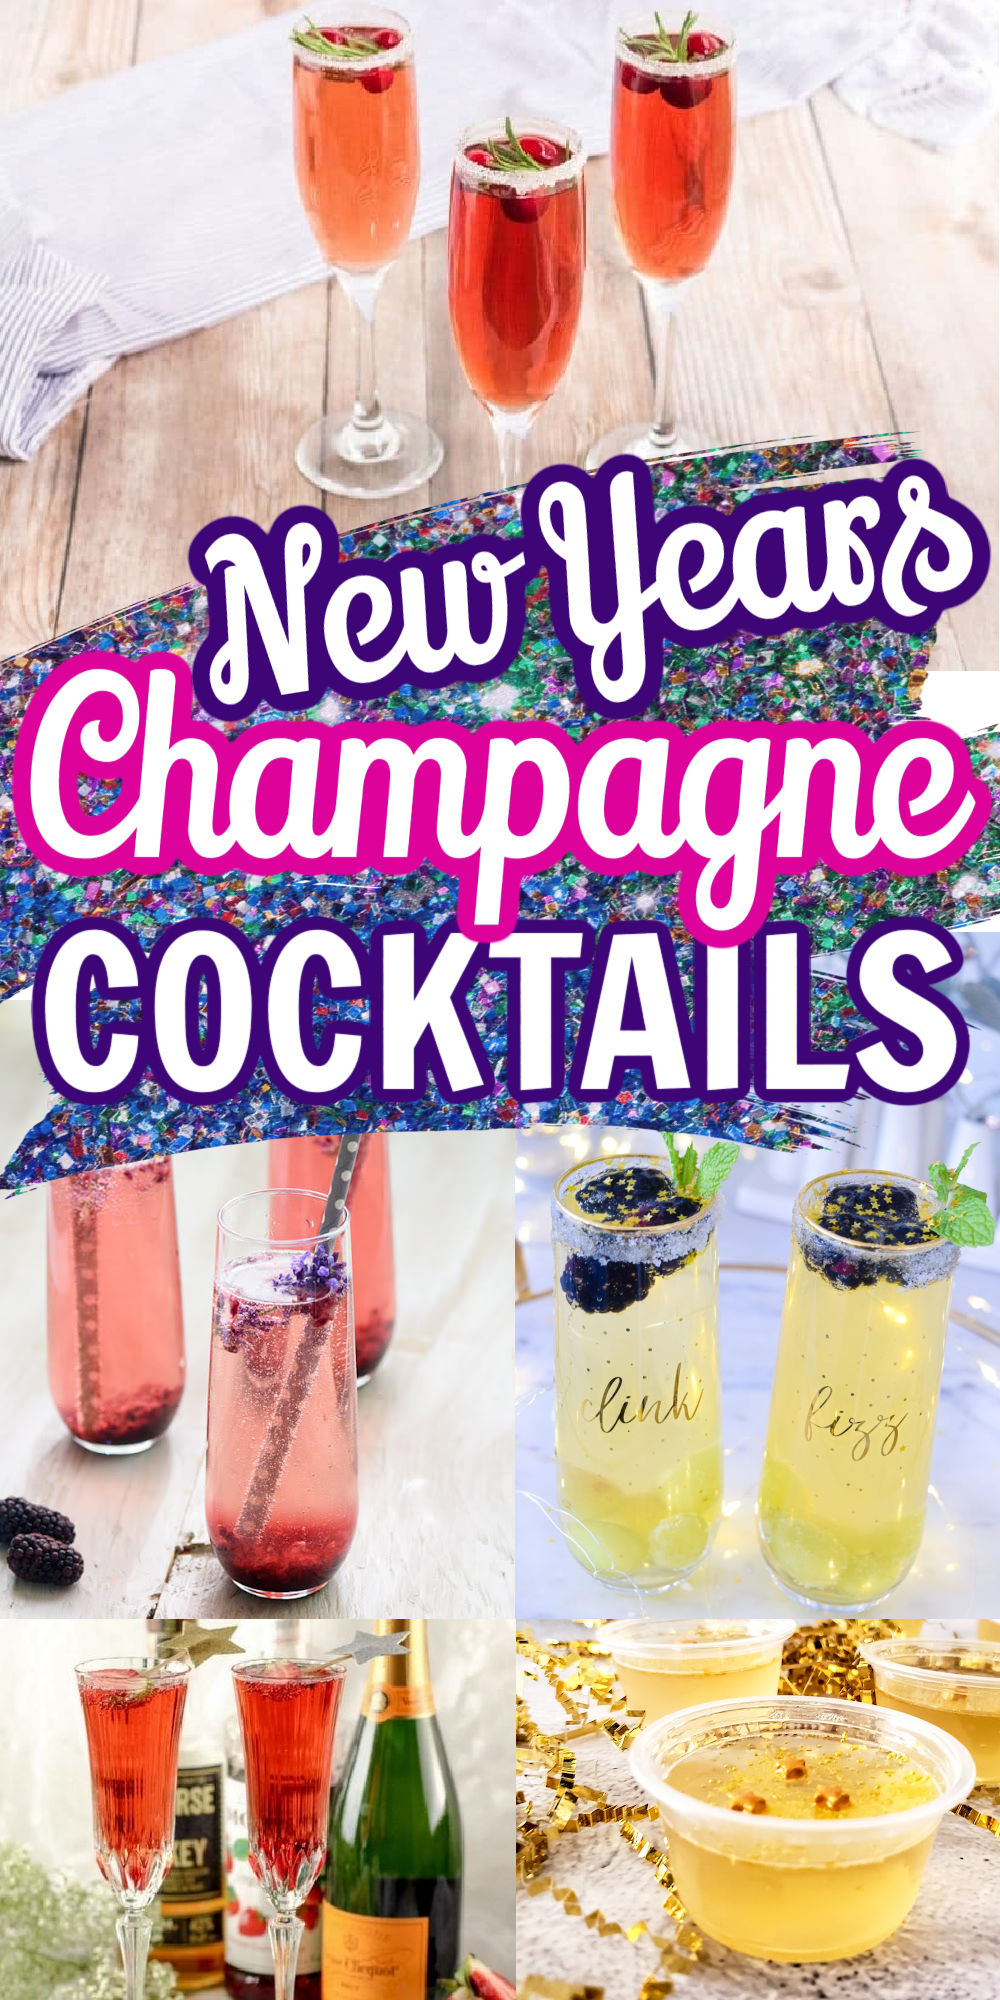 A collage of Champagne cocktails made of pink champagne and traditional champagne for New Year's Eve parties.